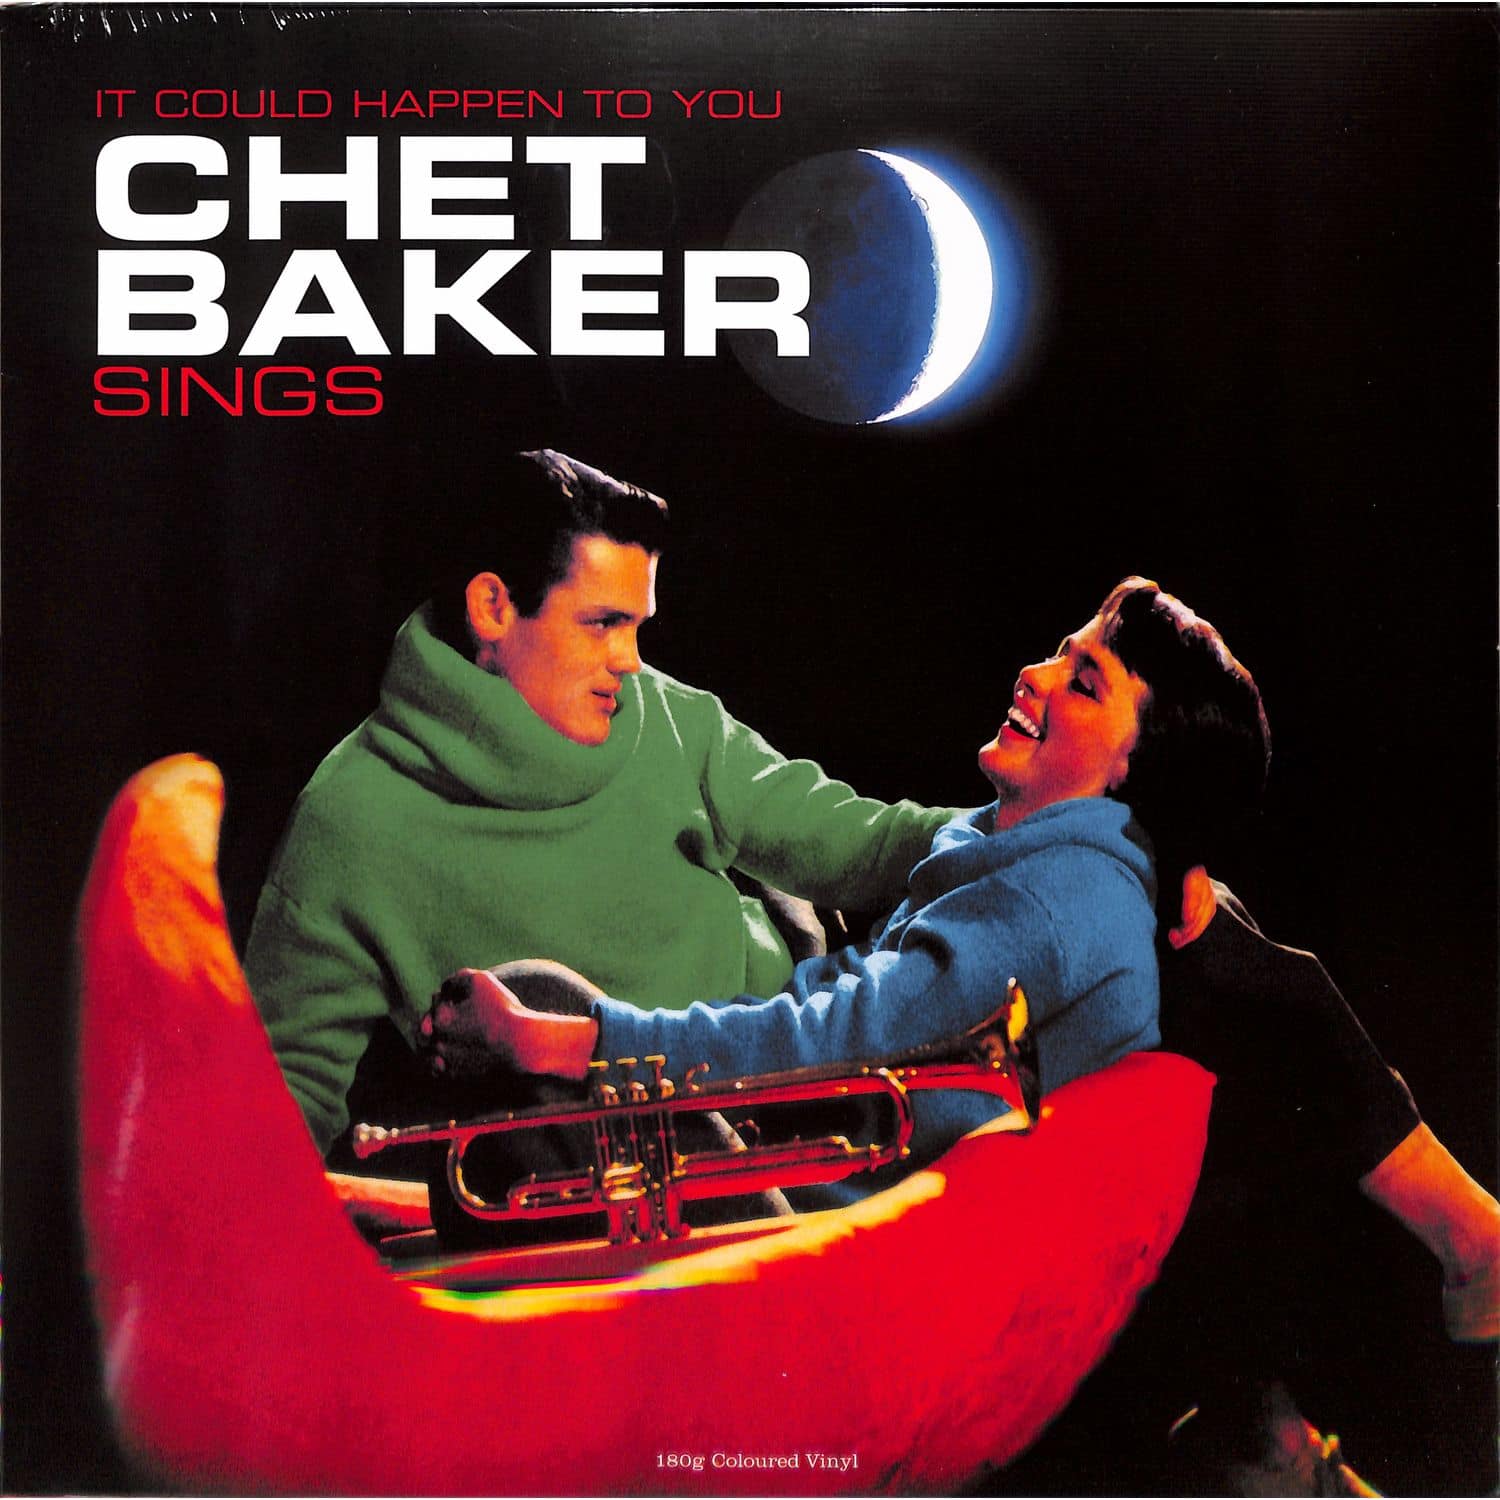 Chet Baker - IT COULD HAPPEN TO YOU 